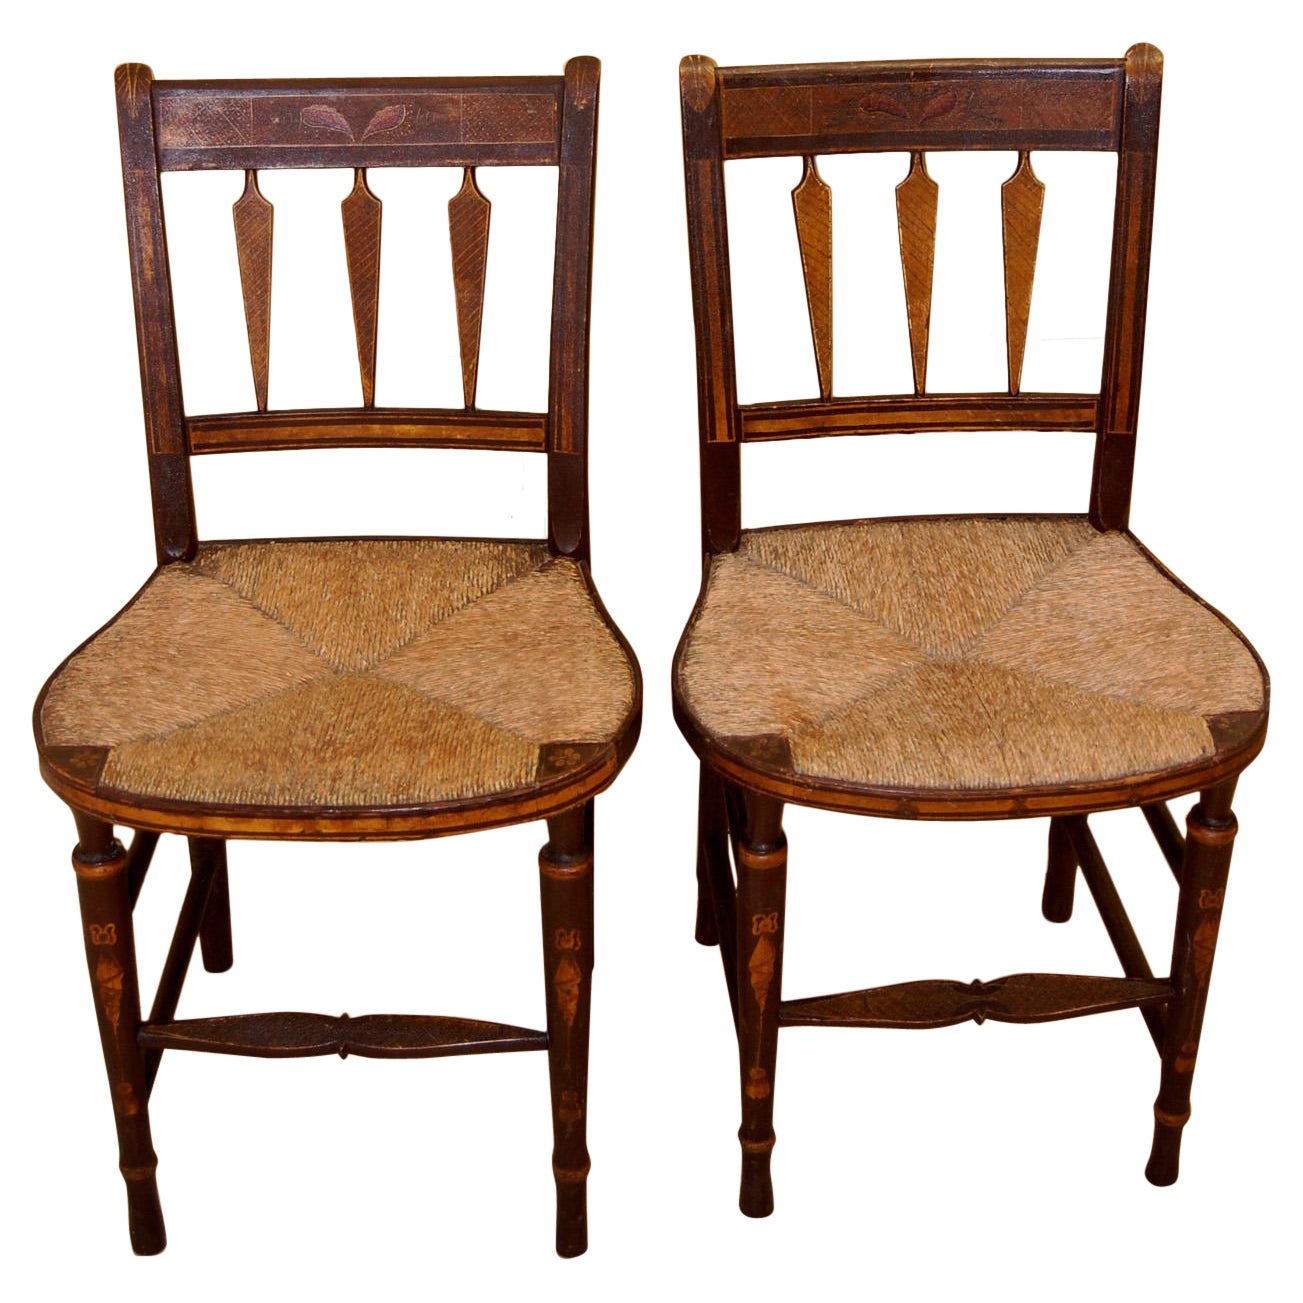 American Early 19th Century Pair of Fancy Sheraton Chairs Original Decoration For Sale